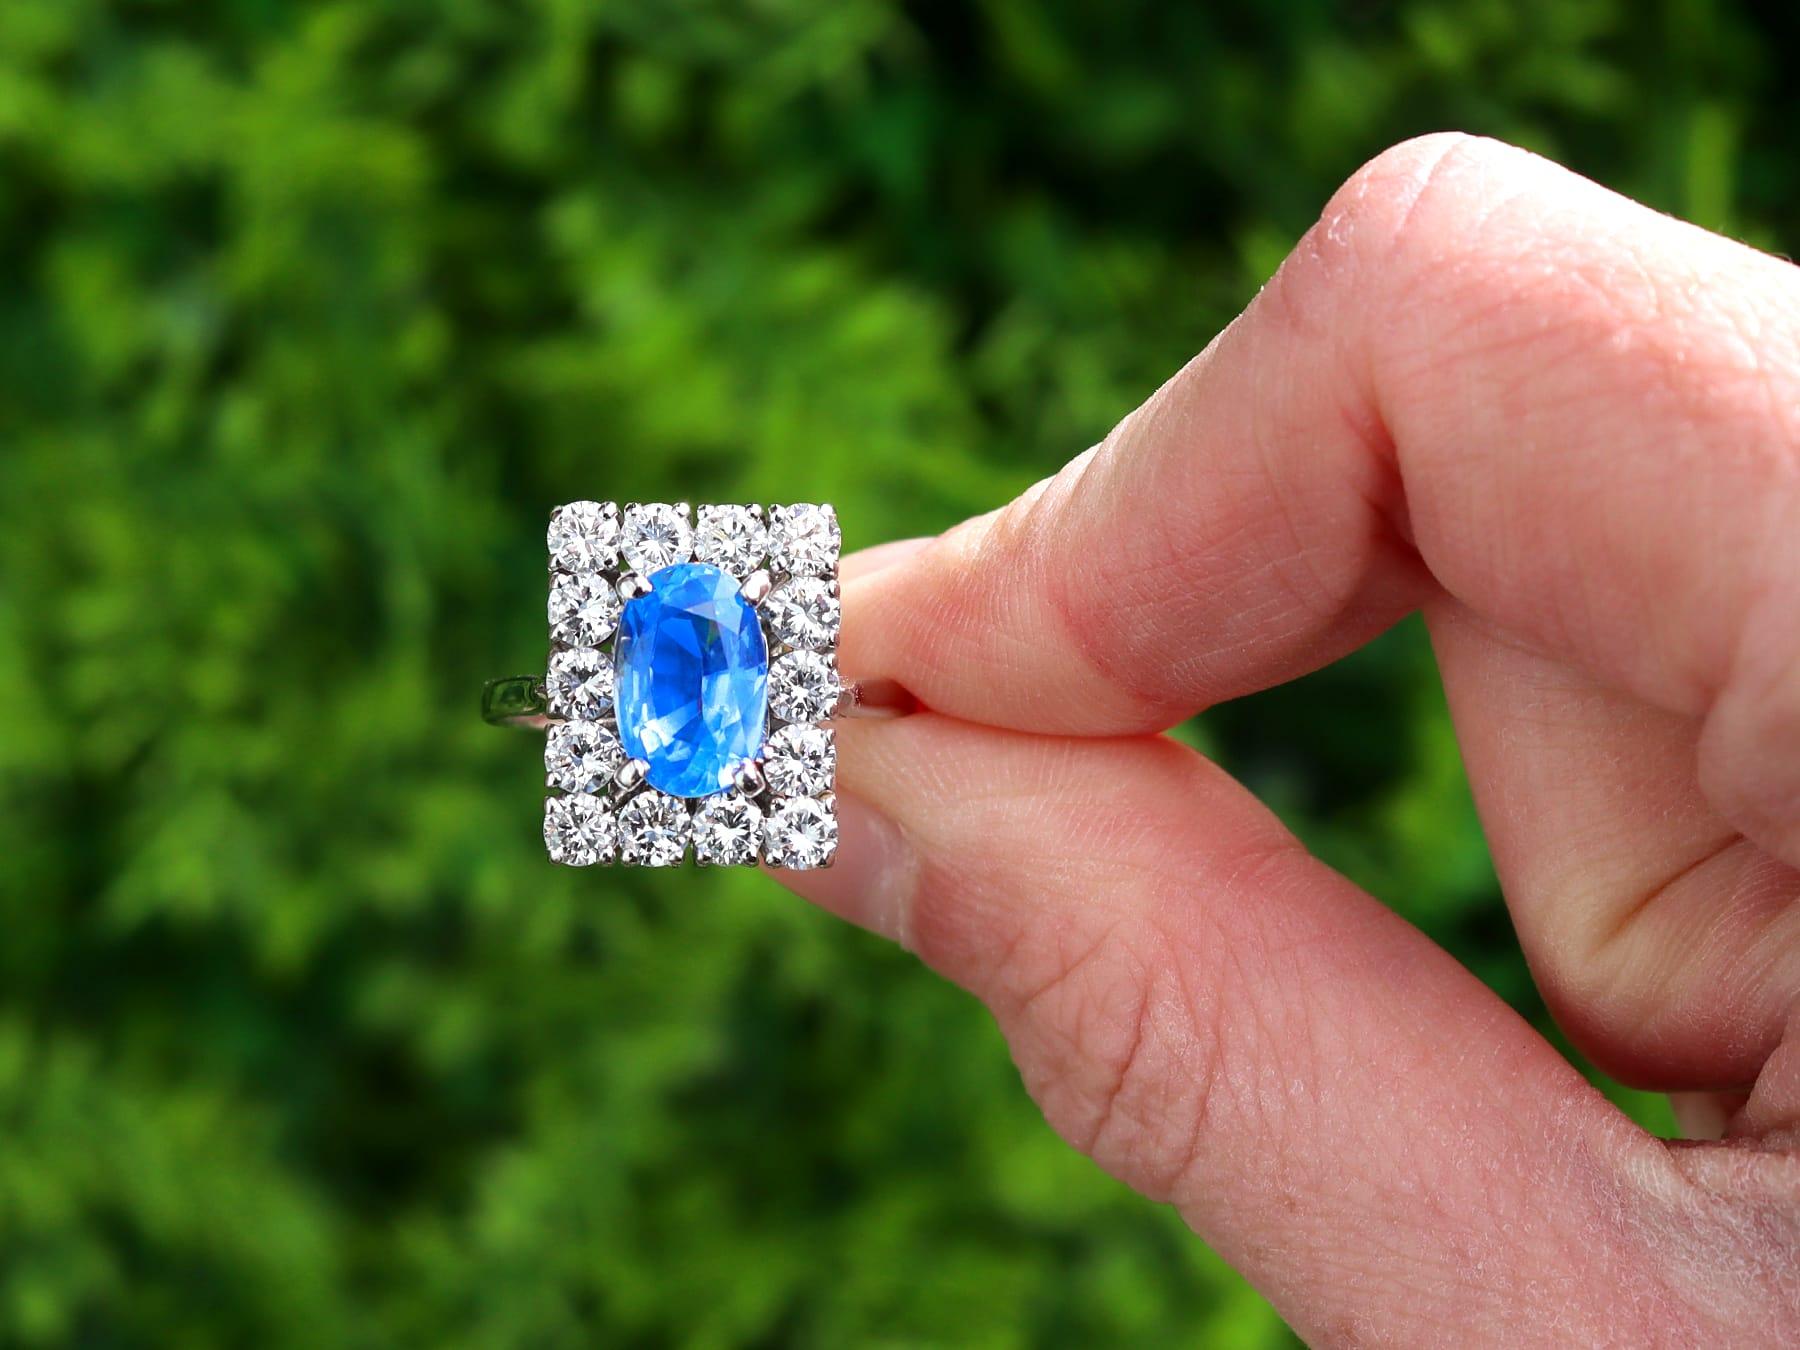 A stunning and impressive vintage French 3 carat Ceylon sapphire and 2.38 carat diamond, 18 carat white gold dress ring; part of our diverse antique estate jewelry collections

This stunning, fine and impressive vintage sapphire and diamond ring has